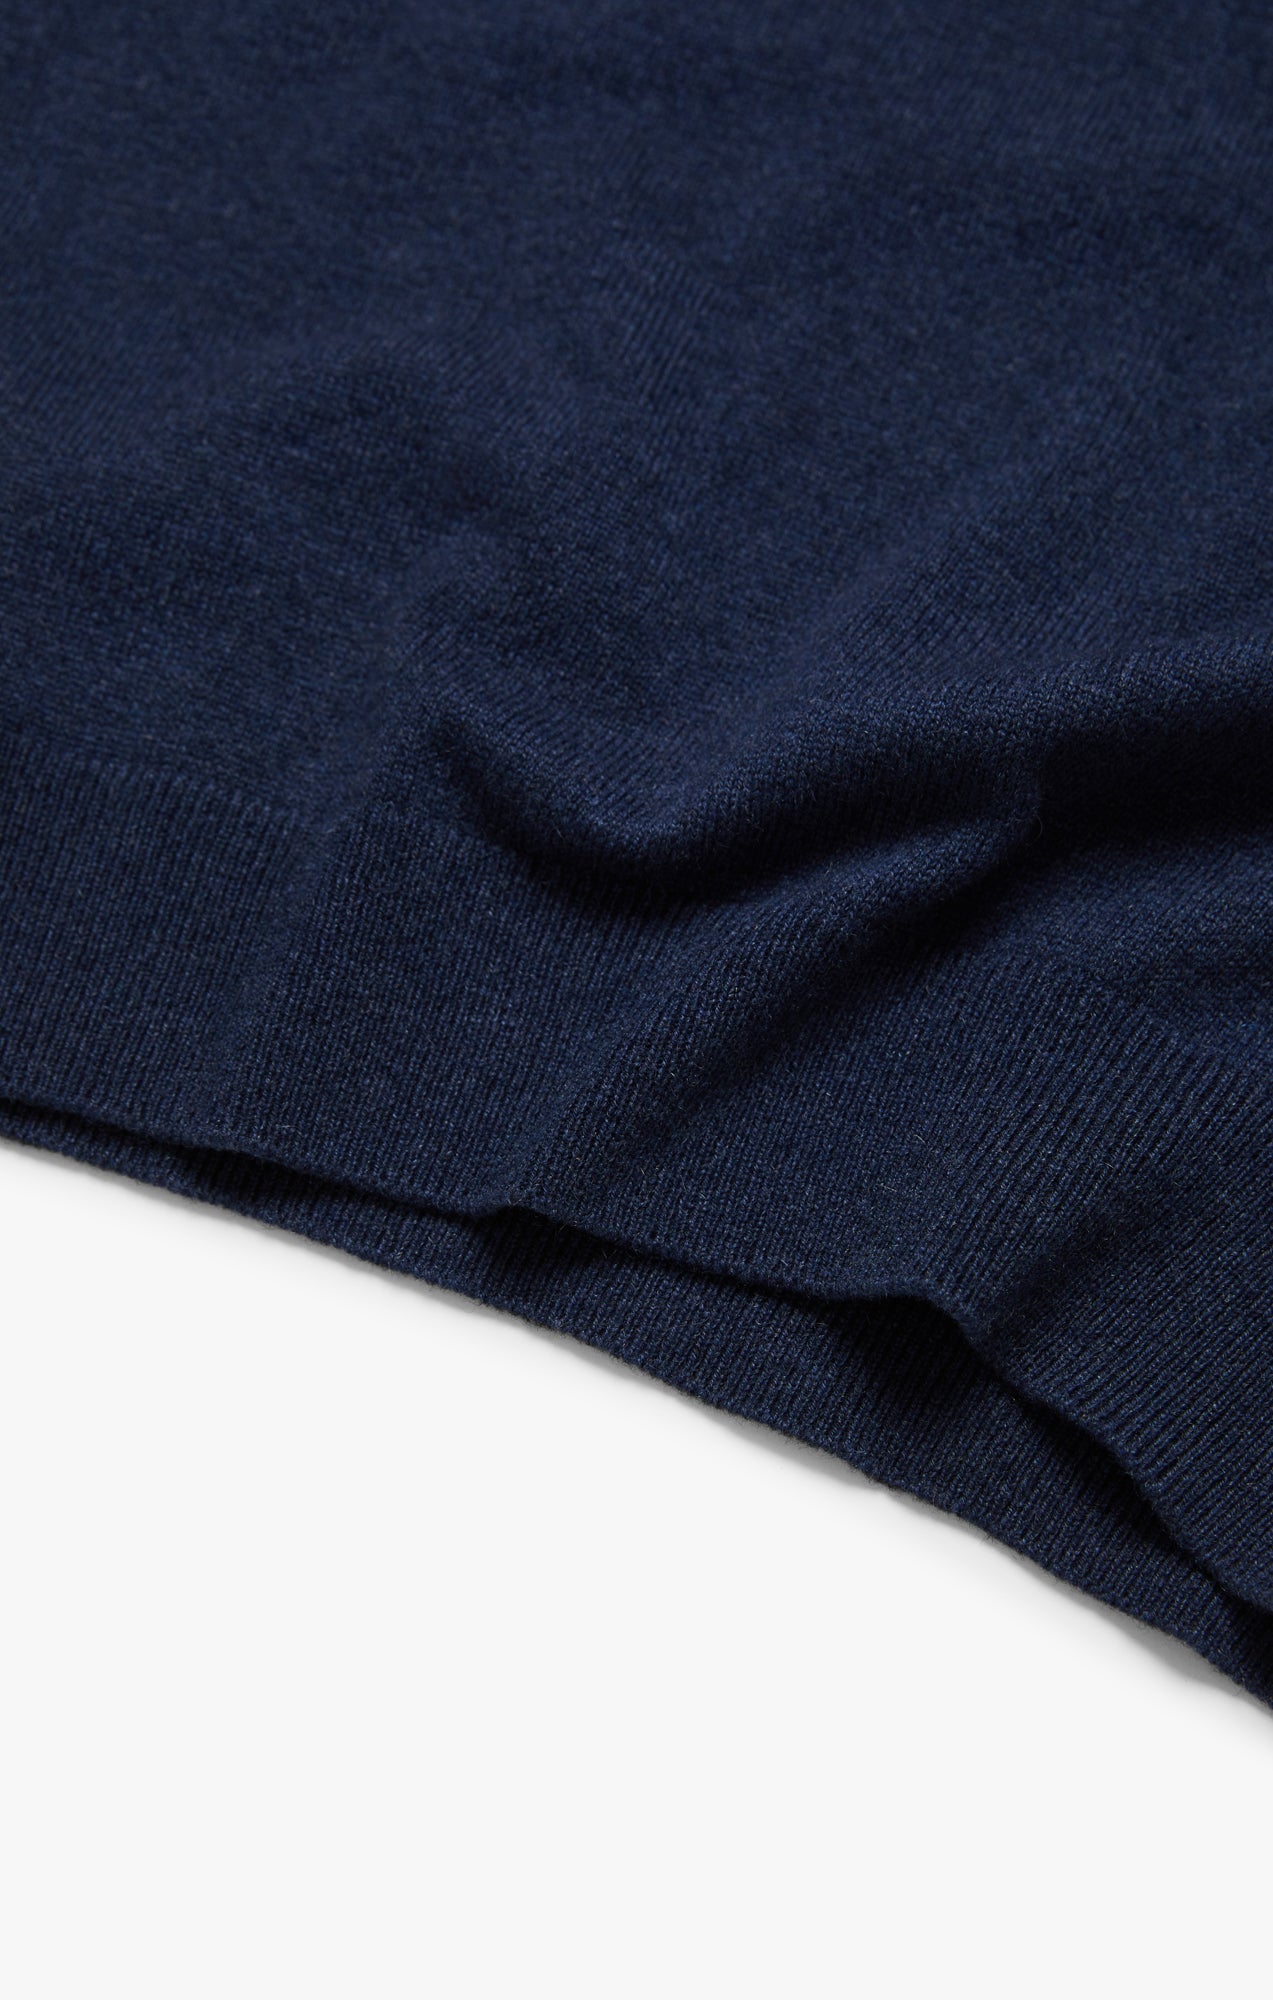 Cashmere Crew Neck Sweater In Navy Image 10